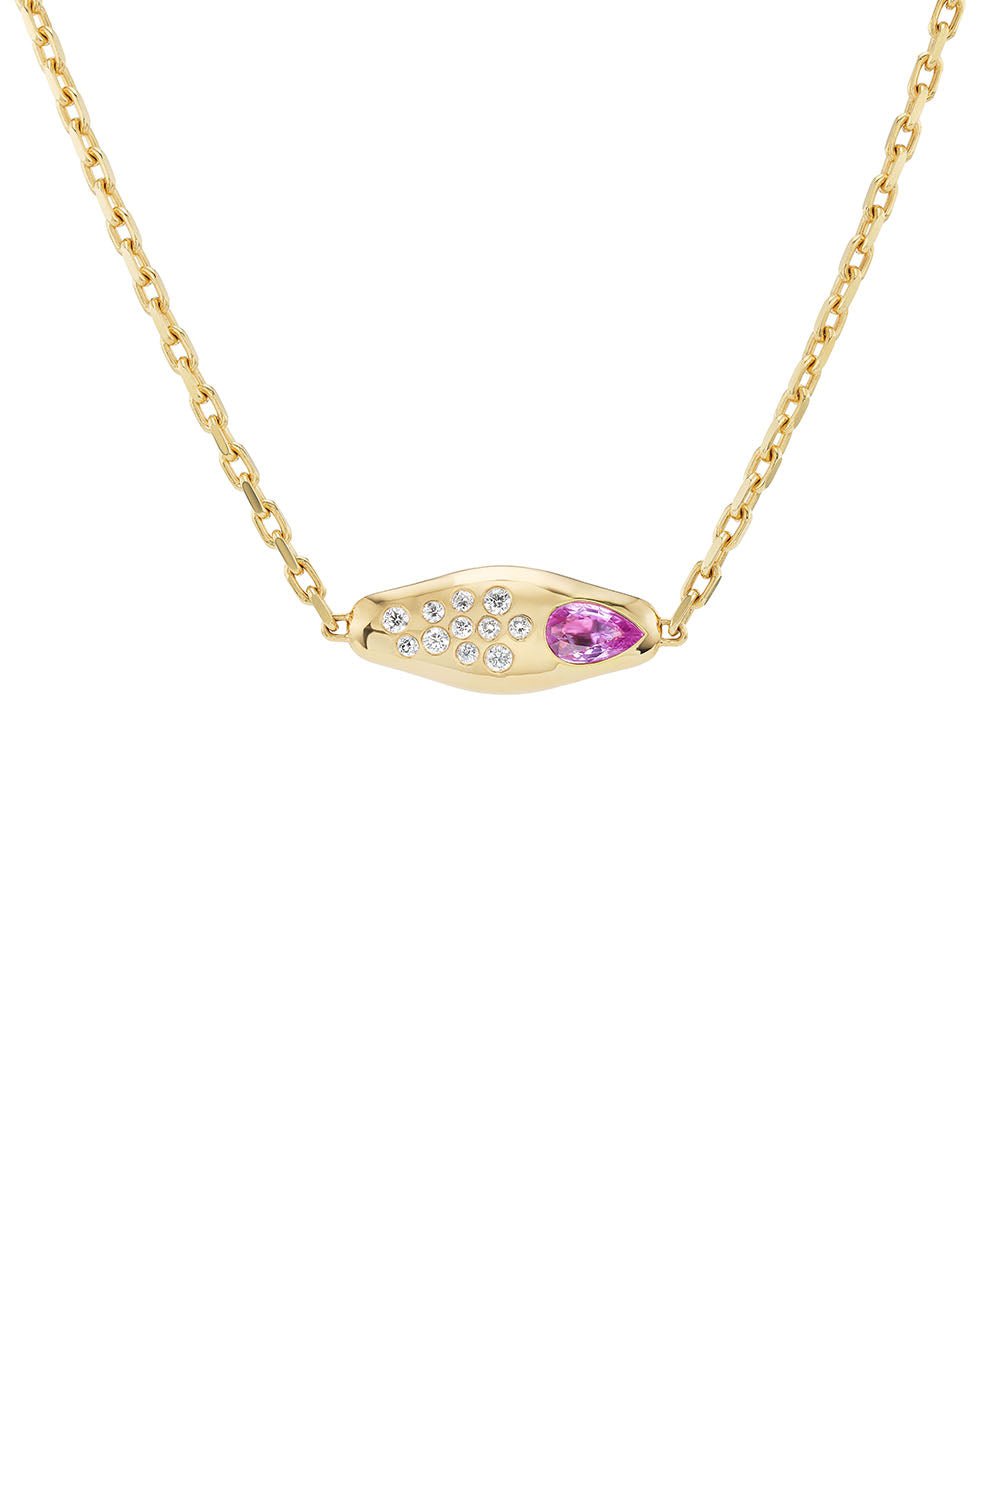 UNIFORM OBJECT-Pink Sapphire Vessel Necklace-YELLOW GOLD